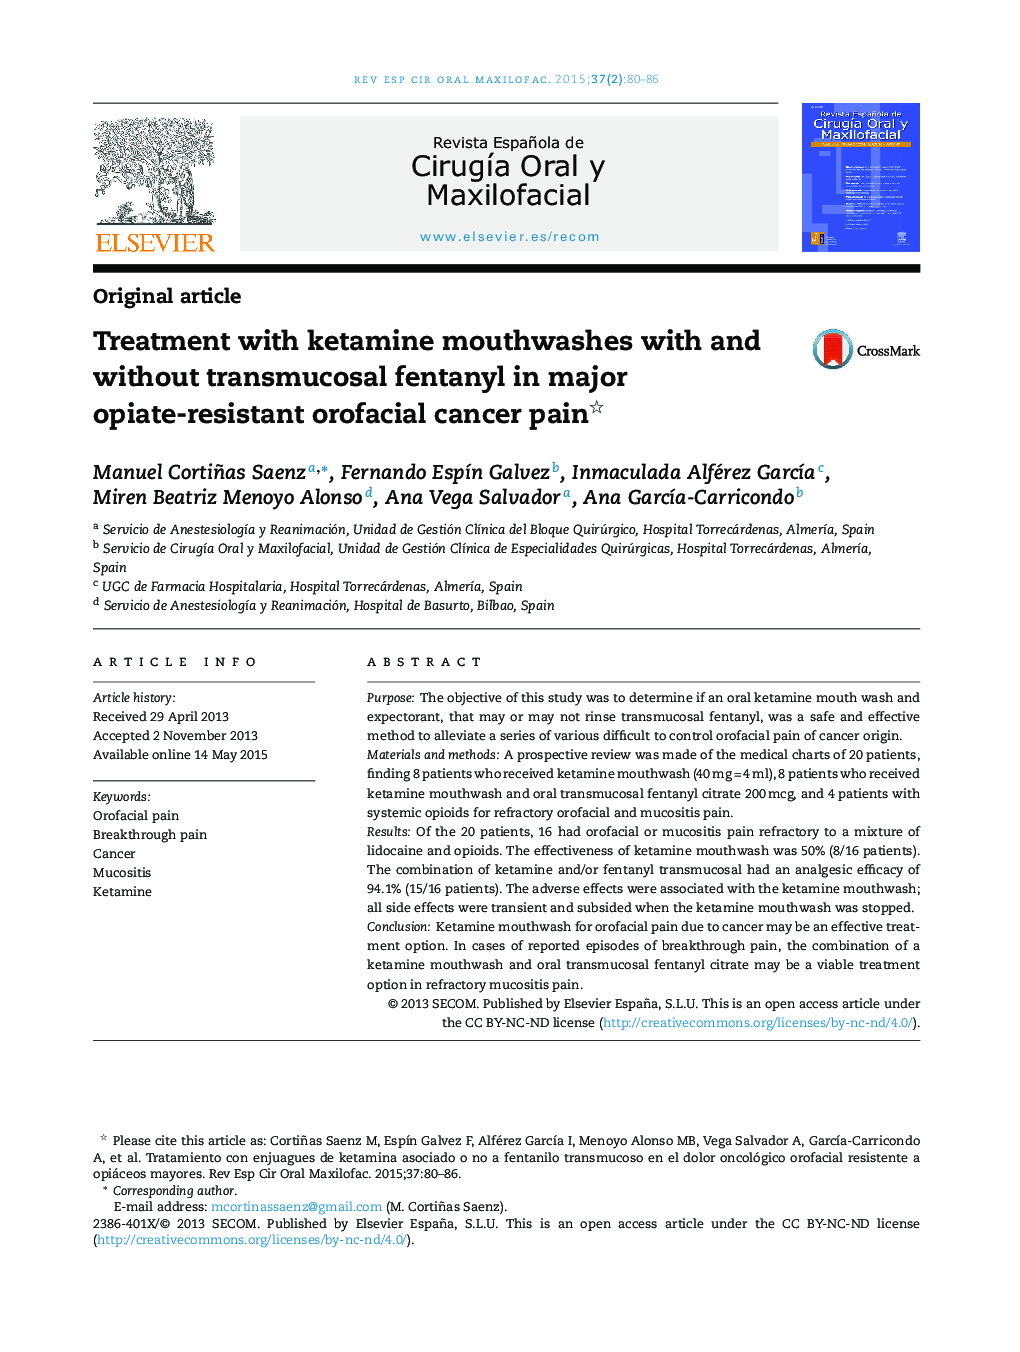 Treatment with ketamine mouthwashes with and without transmucosal fentanyl in major opiate-resistant orofacial cancer pain 